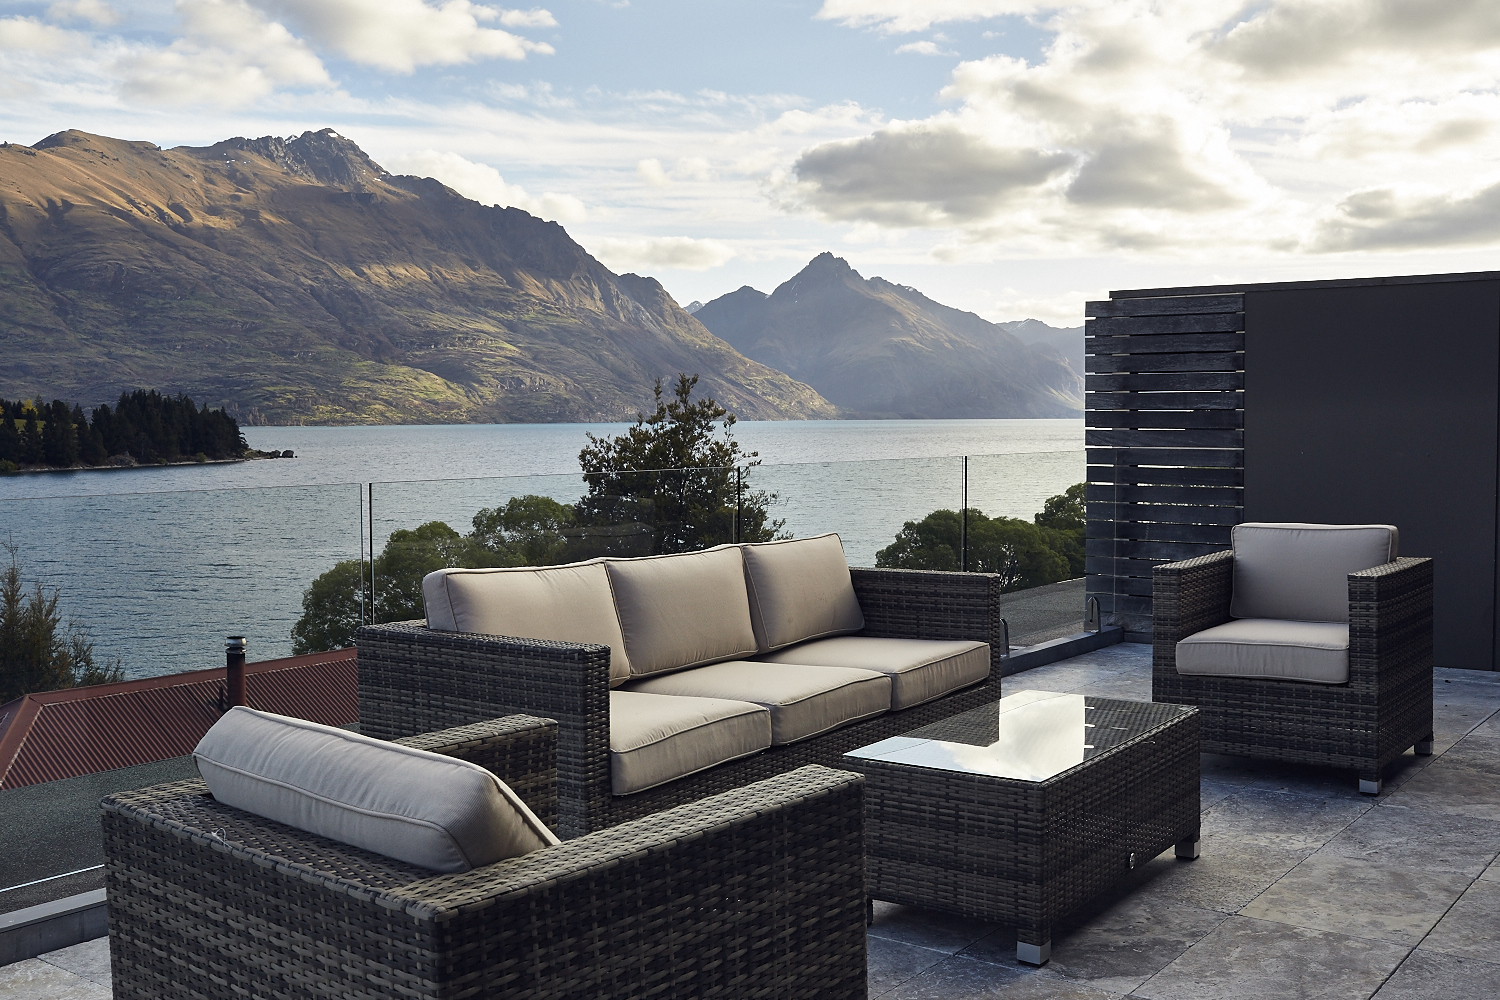 180 Degree Views of Lake Wakitipu and the Remarkable Mountains (Queenstown, New Zealand) This modern penthouse provides expansive lake views with serene mountain vistas. 